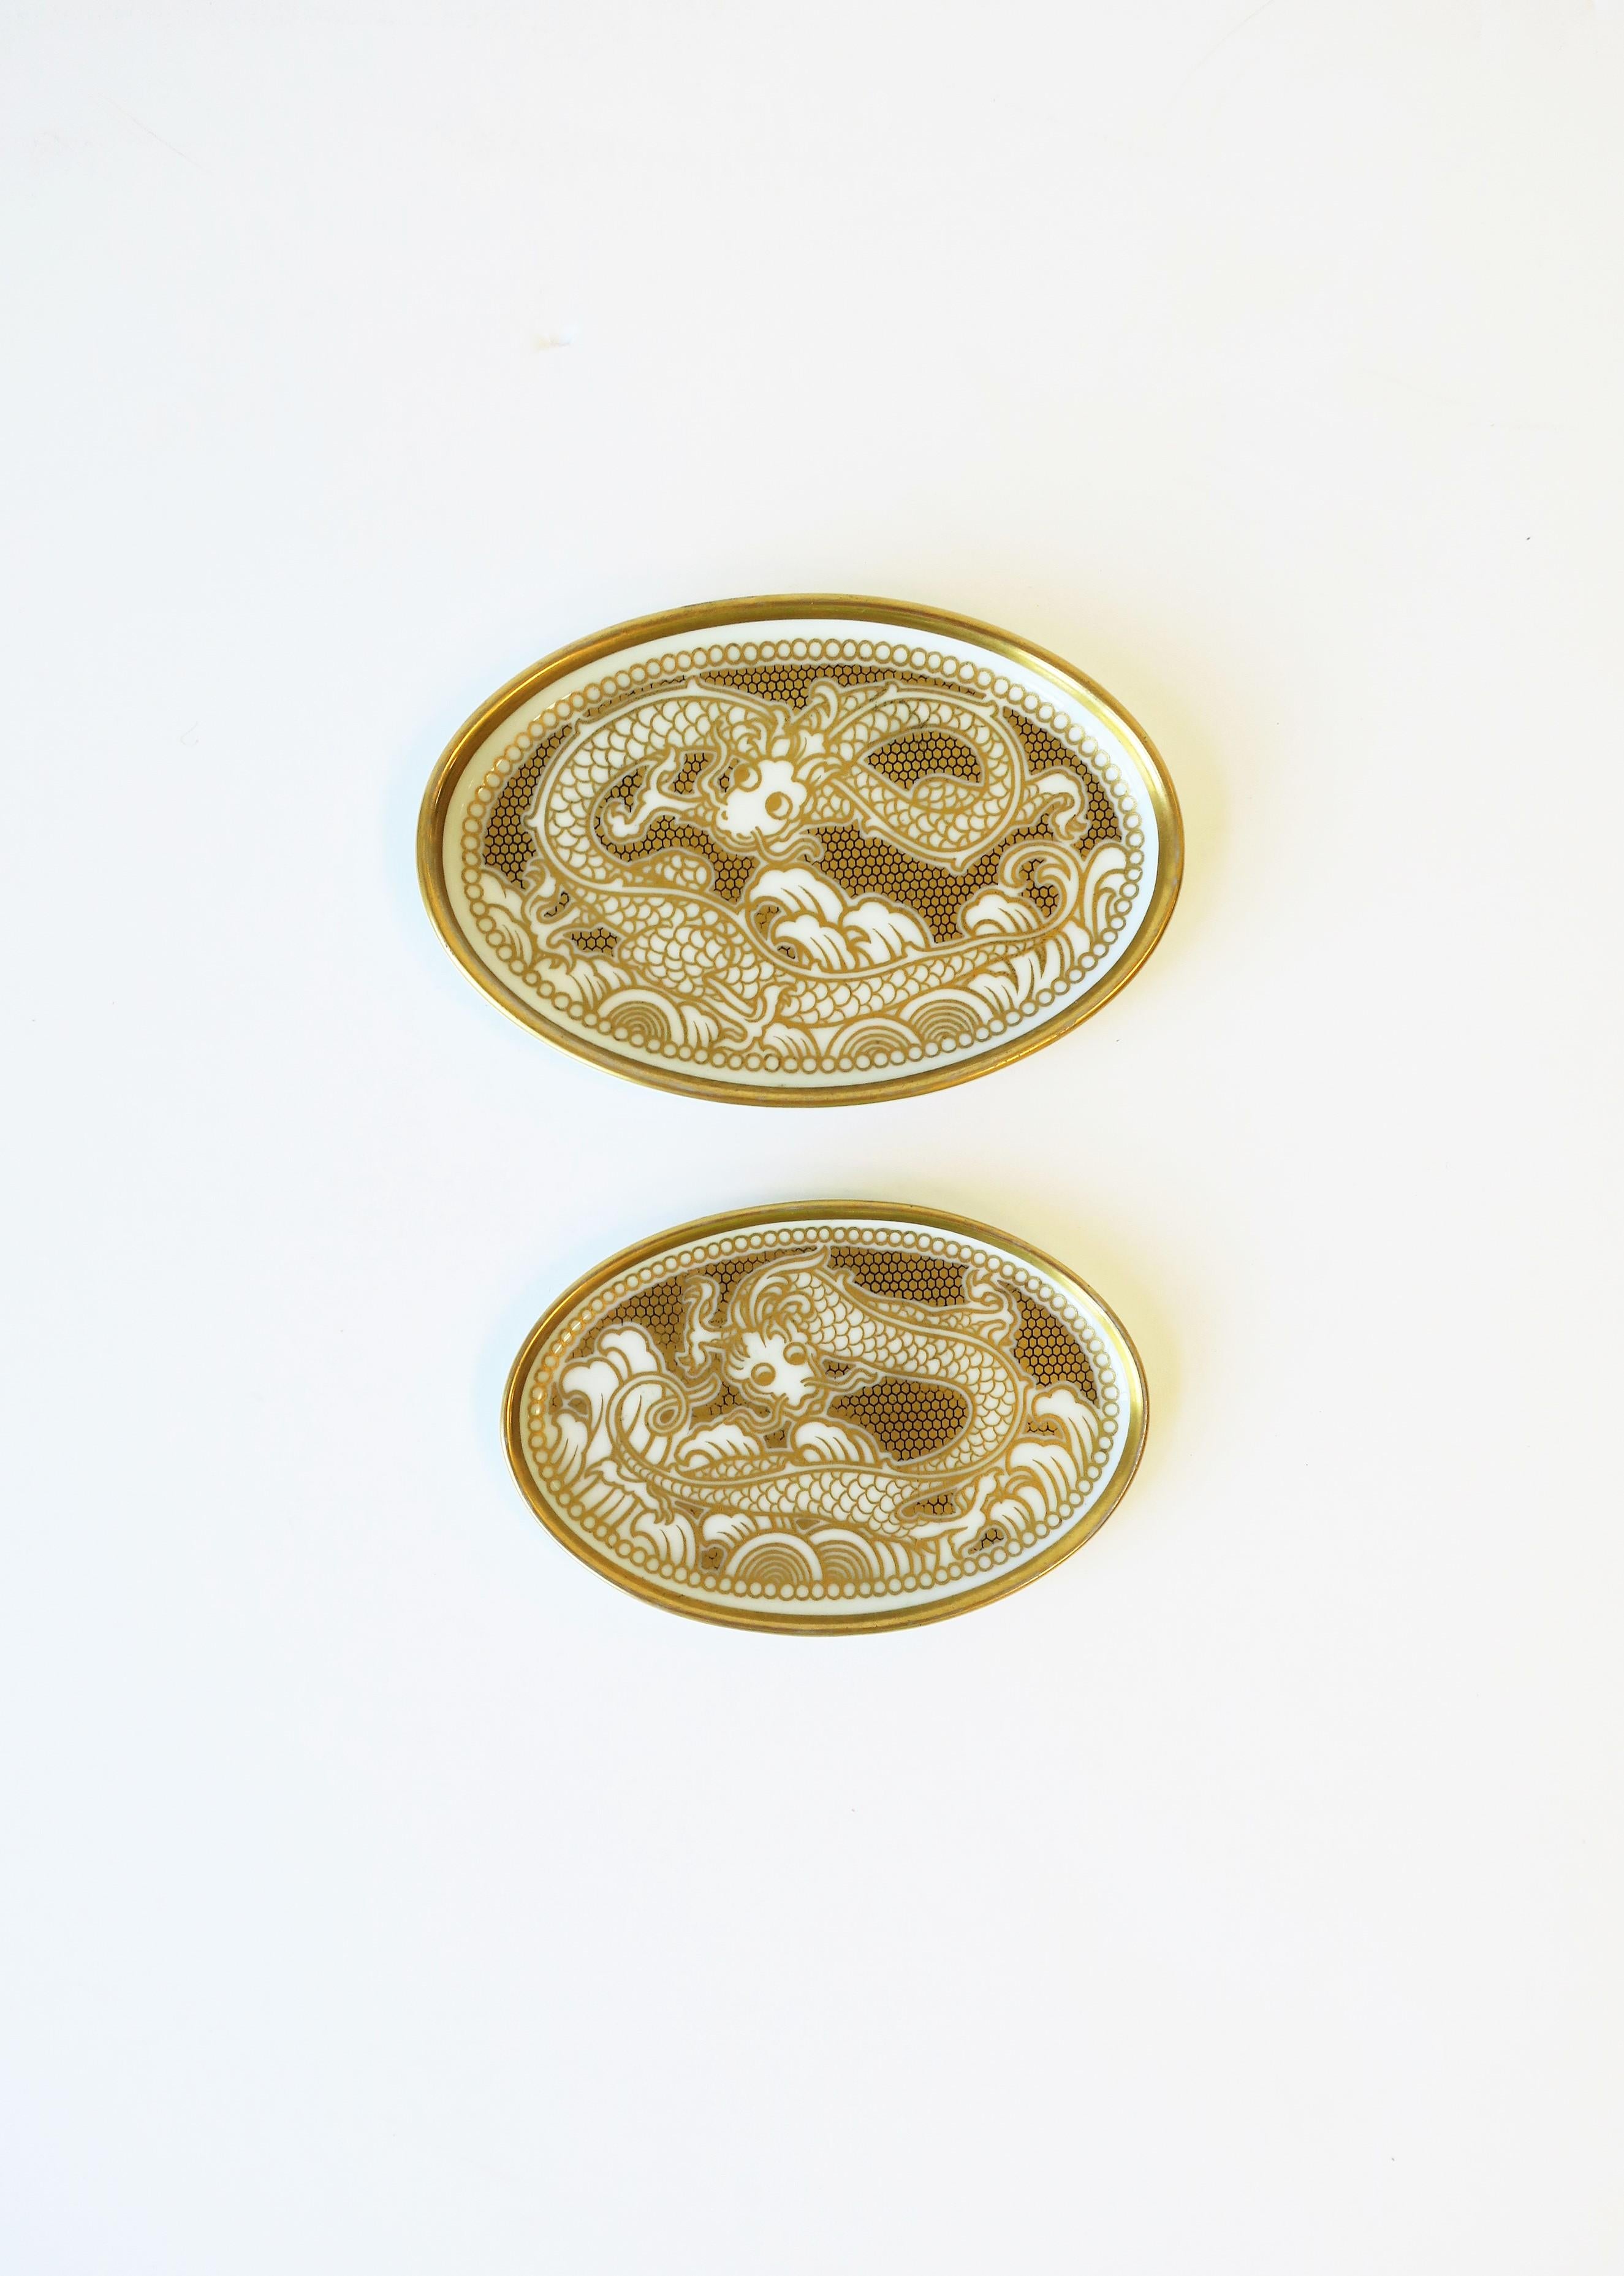 A beautiful, signed set of German white and gold oval porcelain jewelry dishes with dragon design by Rosenthal, circa mid-20th century, Germany. Dishes are signed on back by designer (see images #17 and 18.)  Beautiful pieces to hold jewelry,